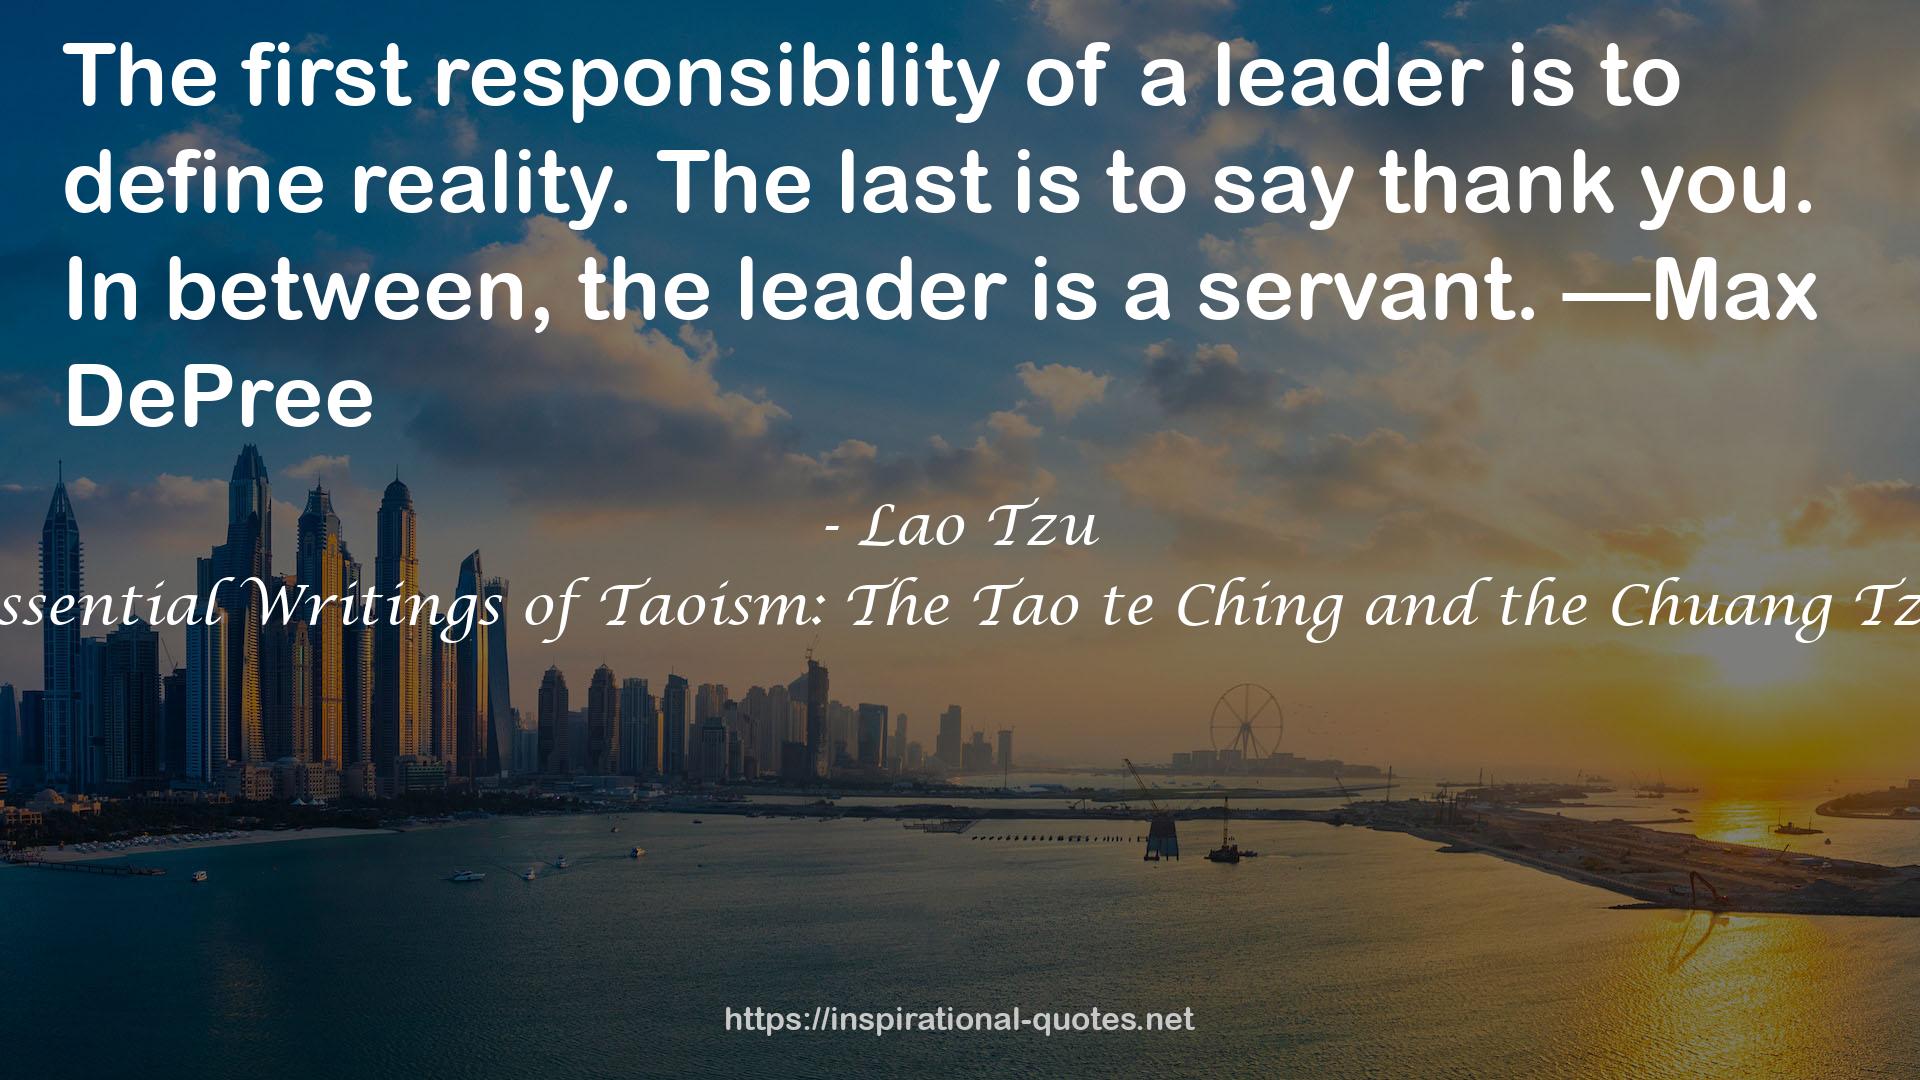 Essential Writings of Taoism: The Tao te Ching and the Chuang Tzu QUOTES